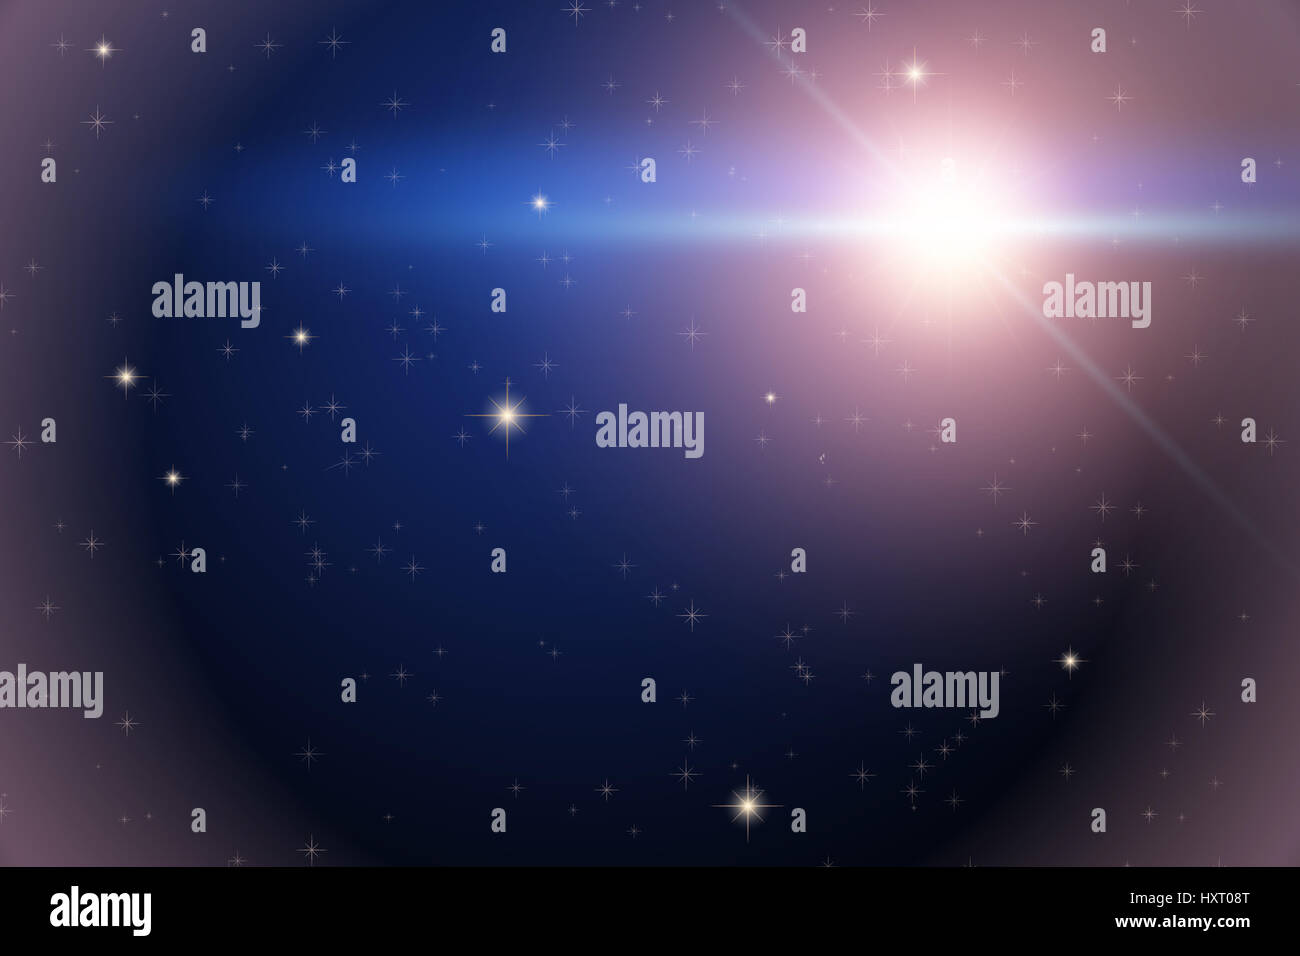 Background of Space with bright star Stock Photo